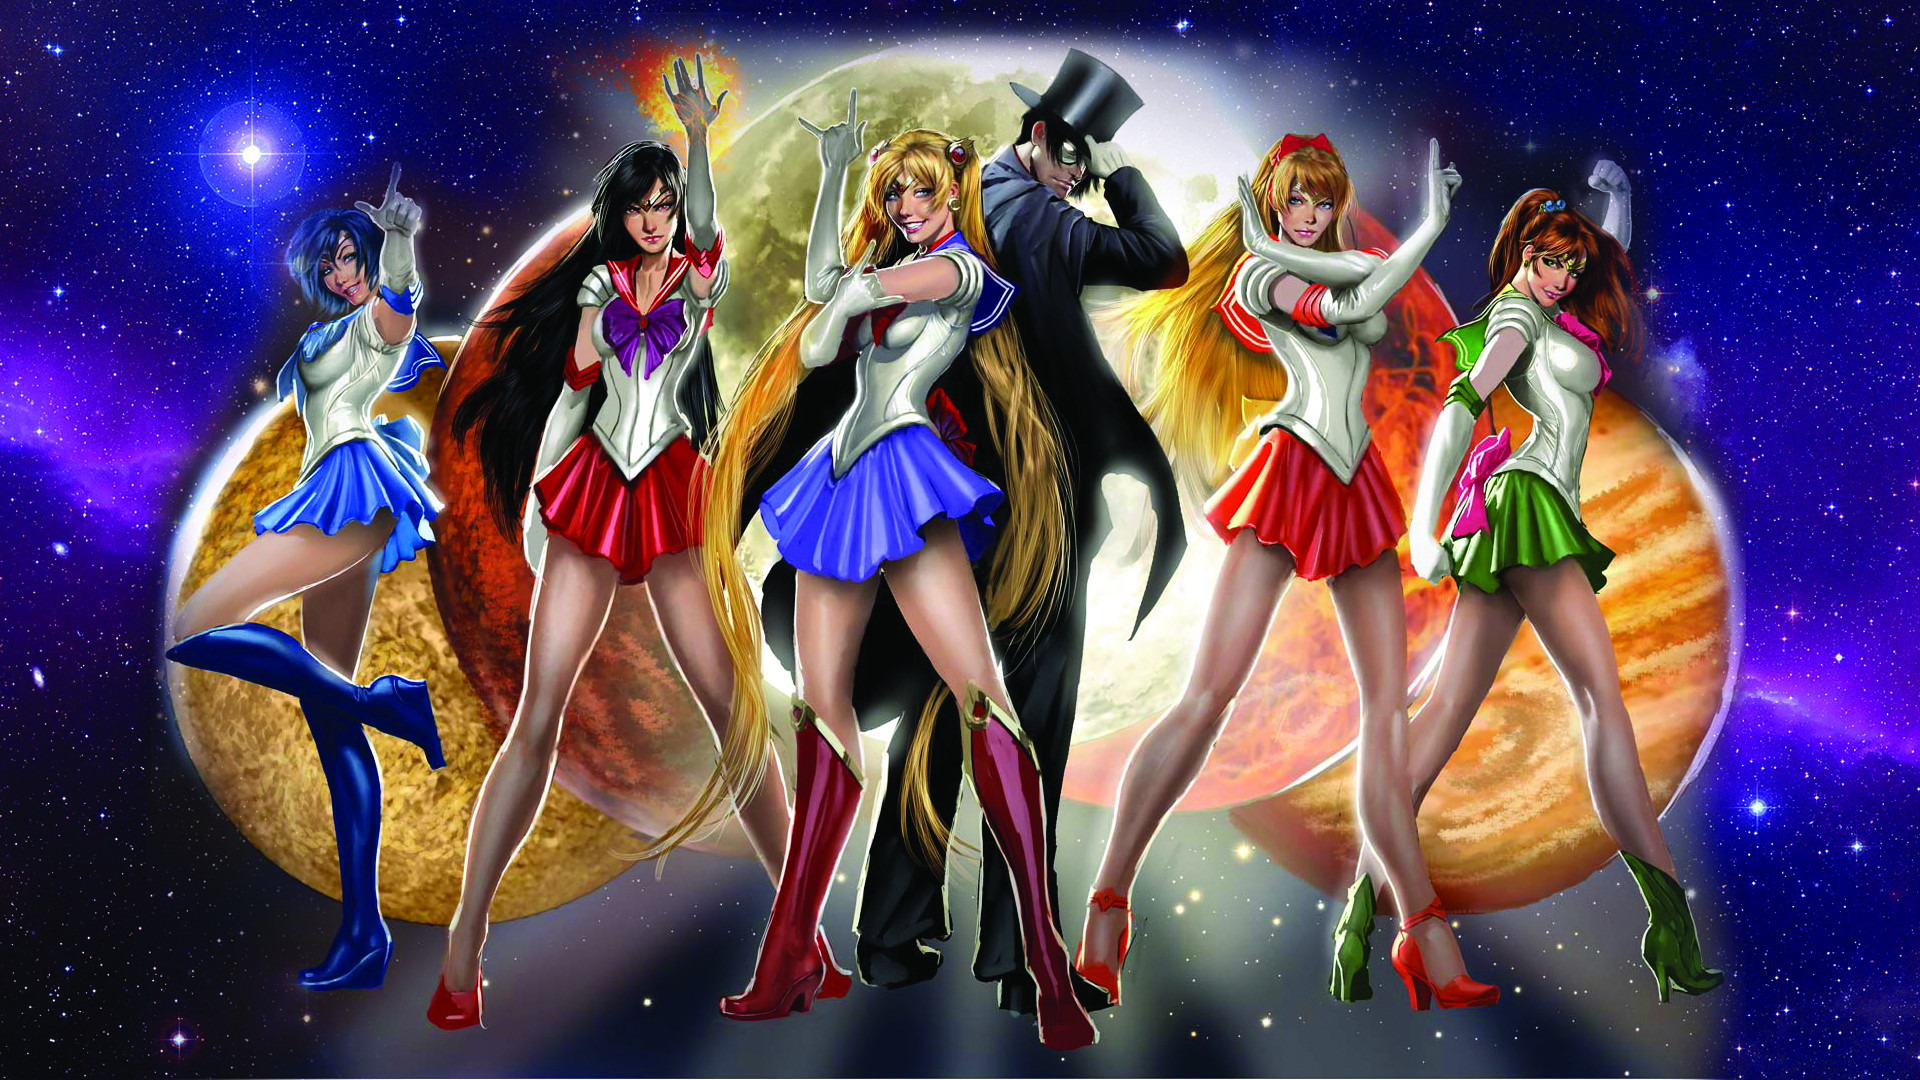 Sailor Moon HD Wallpapers – Wallpaper, High Definition, High Quality .